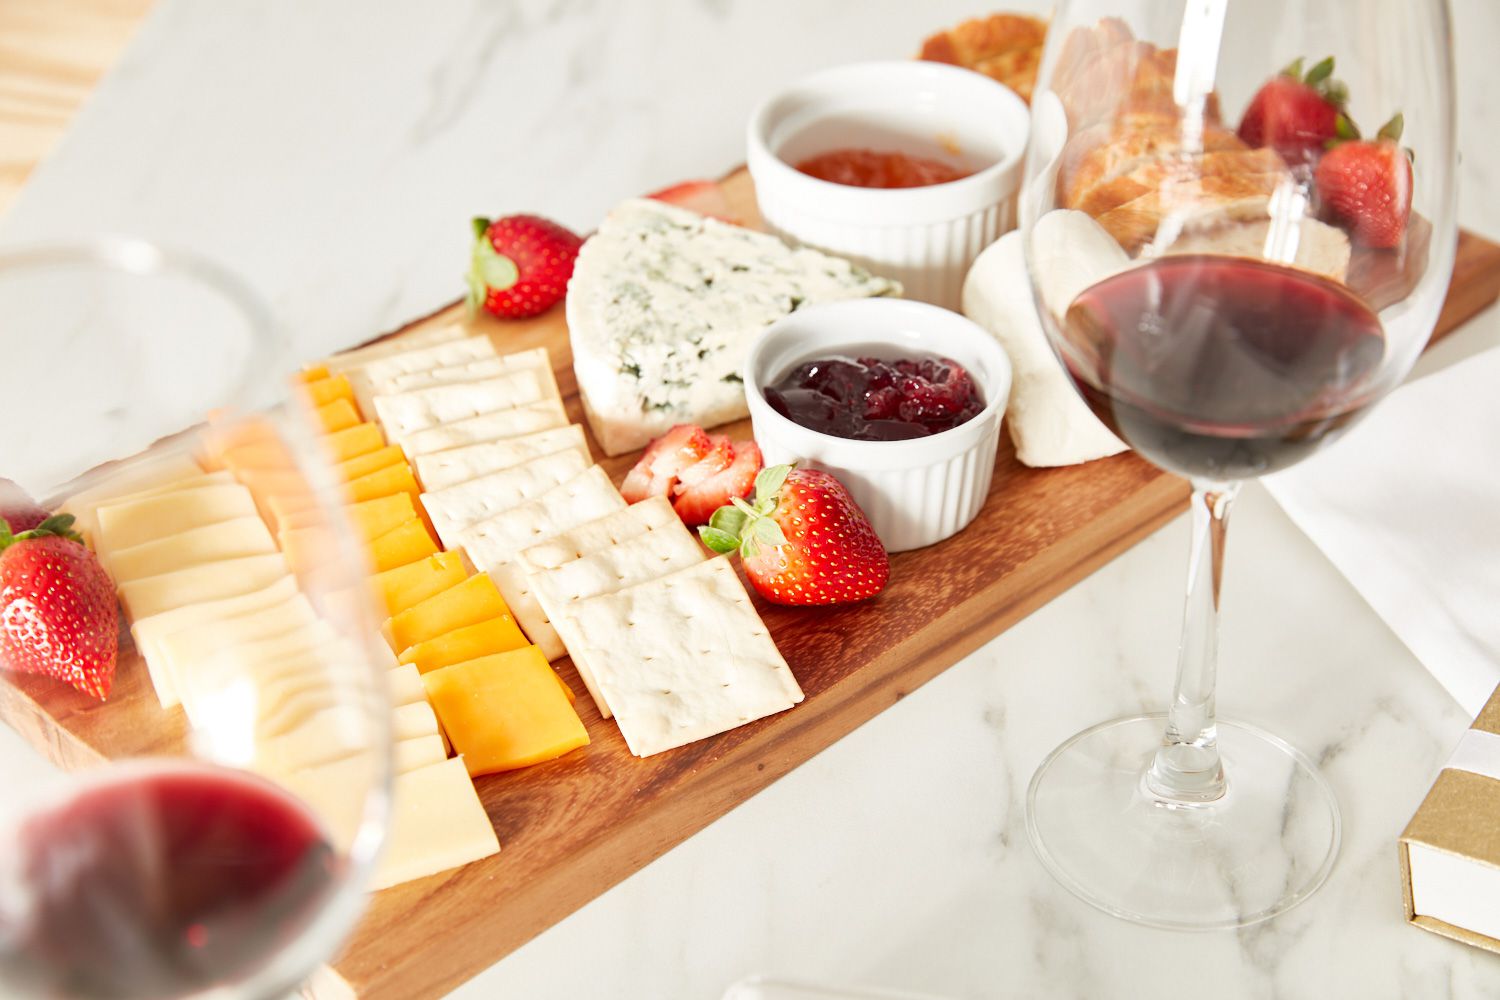 Mark Roemer image of a charcuterie board perfect for Valentine's Day